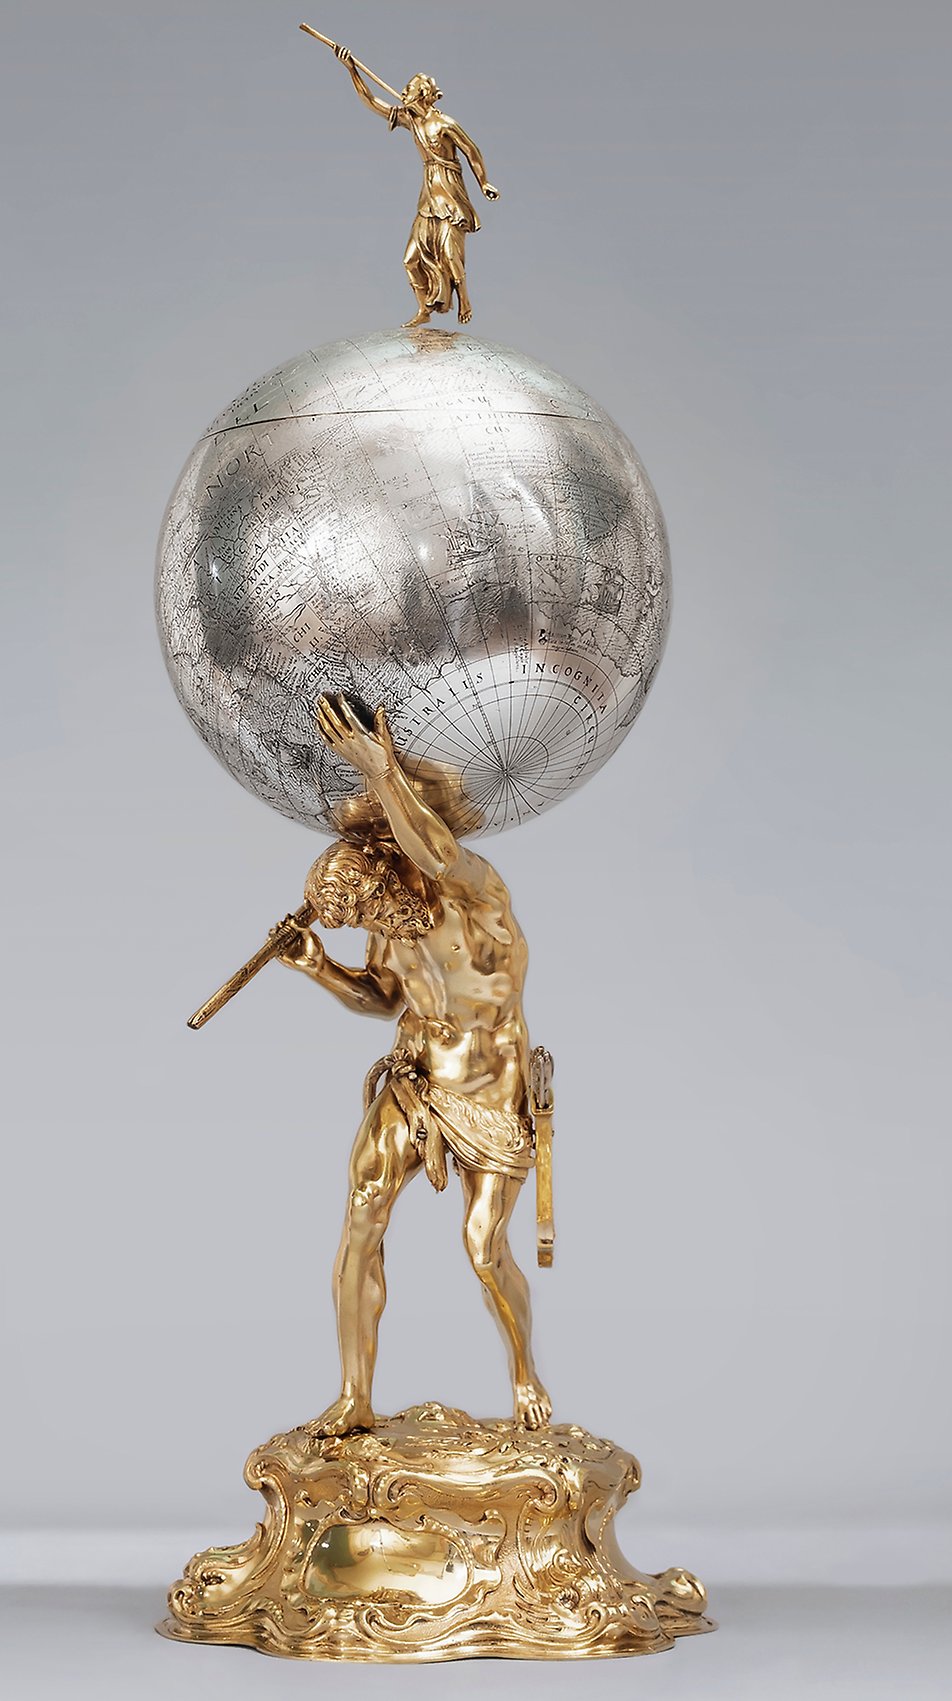 Cup, partly in gilded silver, in the form of Atlas carrying a celestial globe. Made in Nuremberg by goldsmiths Christoph Jamnitzer (1593–1618) and Jeremias Ritter (1605–1646). The top of the globe can be lifted off, and Minerva – the goddess of wisdom – stands on the top. Presented as a gift to King Gustav II Adolf by the citizens of Nuremberg on his entry into the city on 31 March 1632. 